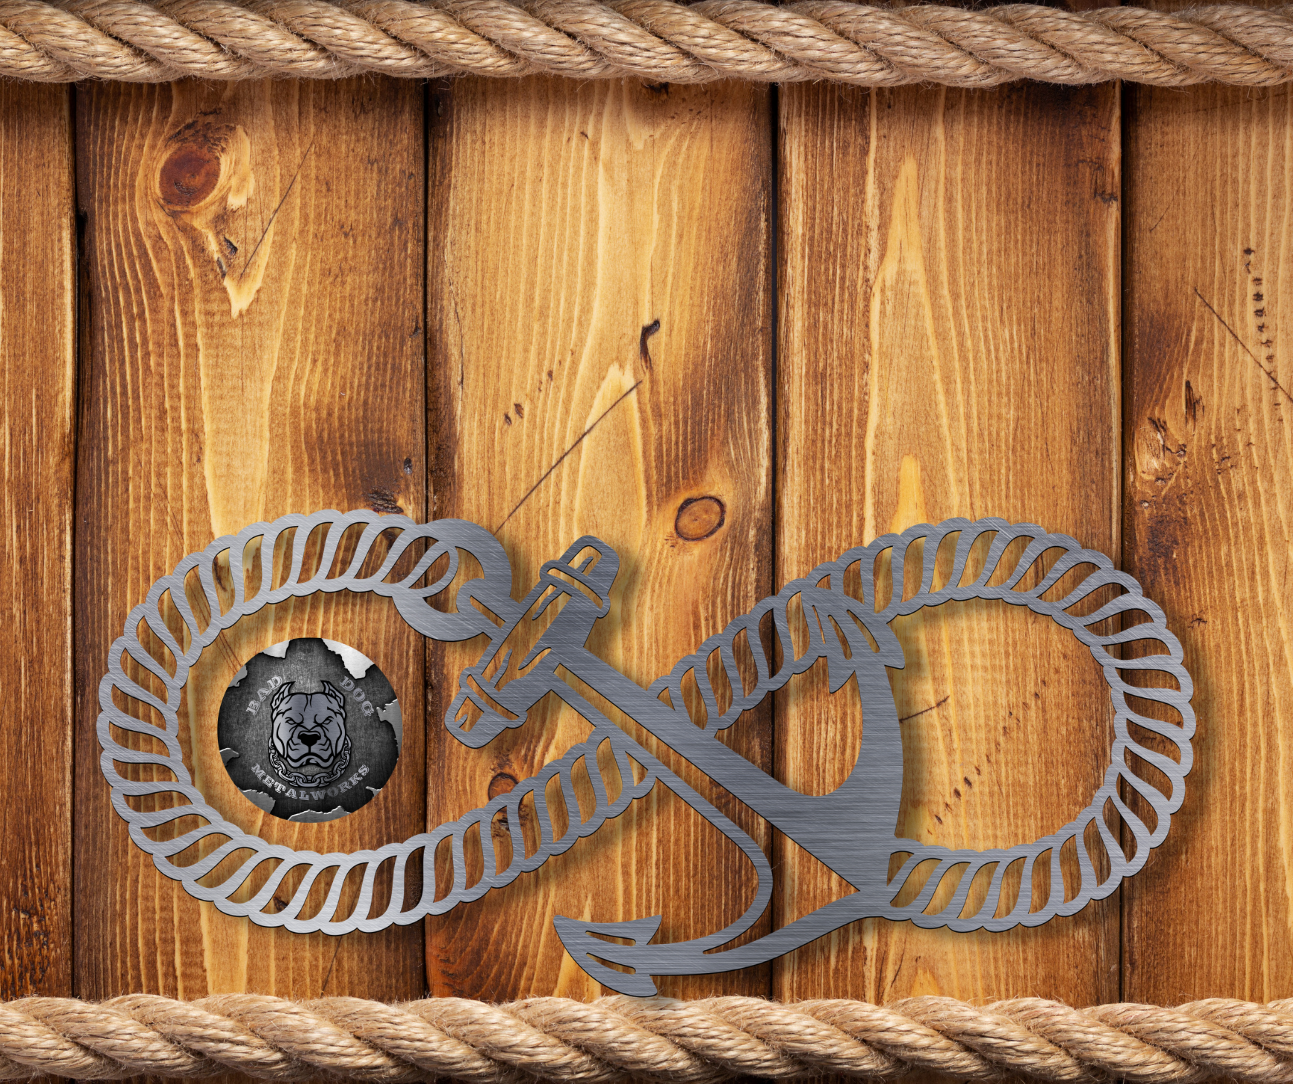 Infinity Rope and Anchor